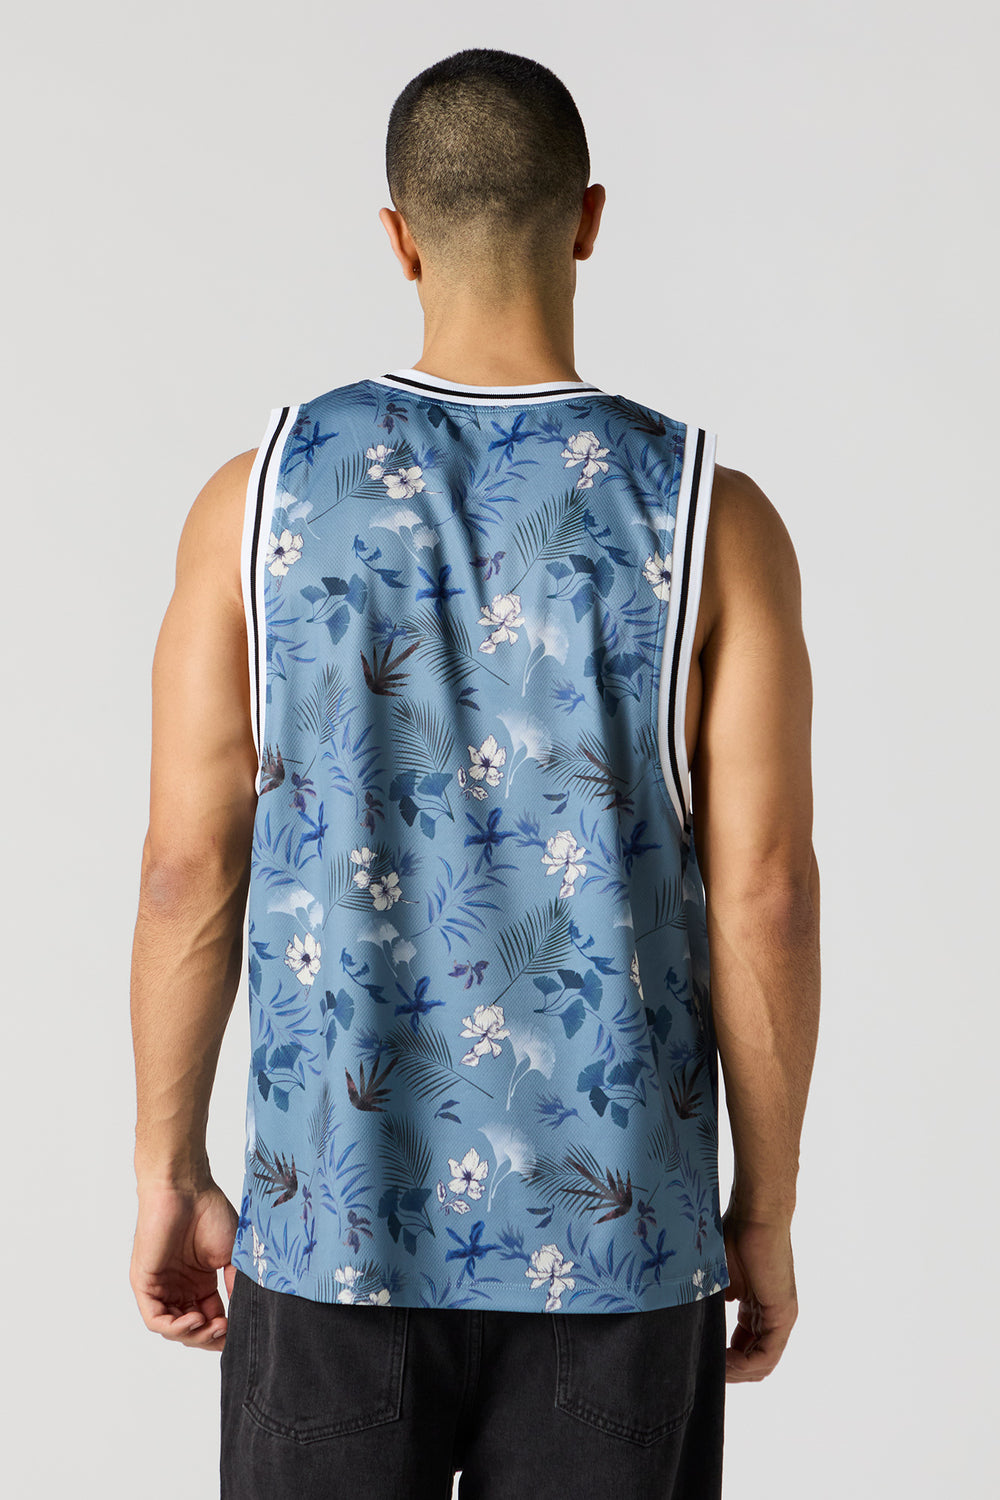 Floral Print Palm Springs Graphic Basketball Jersey Floral Print Palm Springs Graphic Basketball Jersey 4